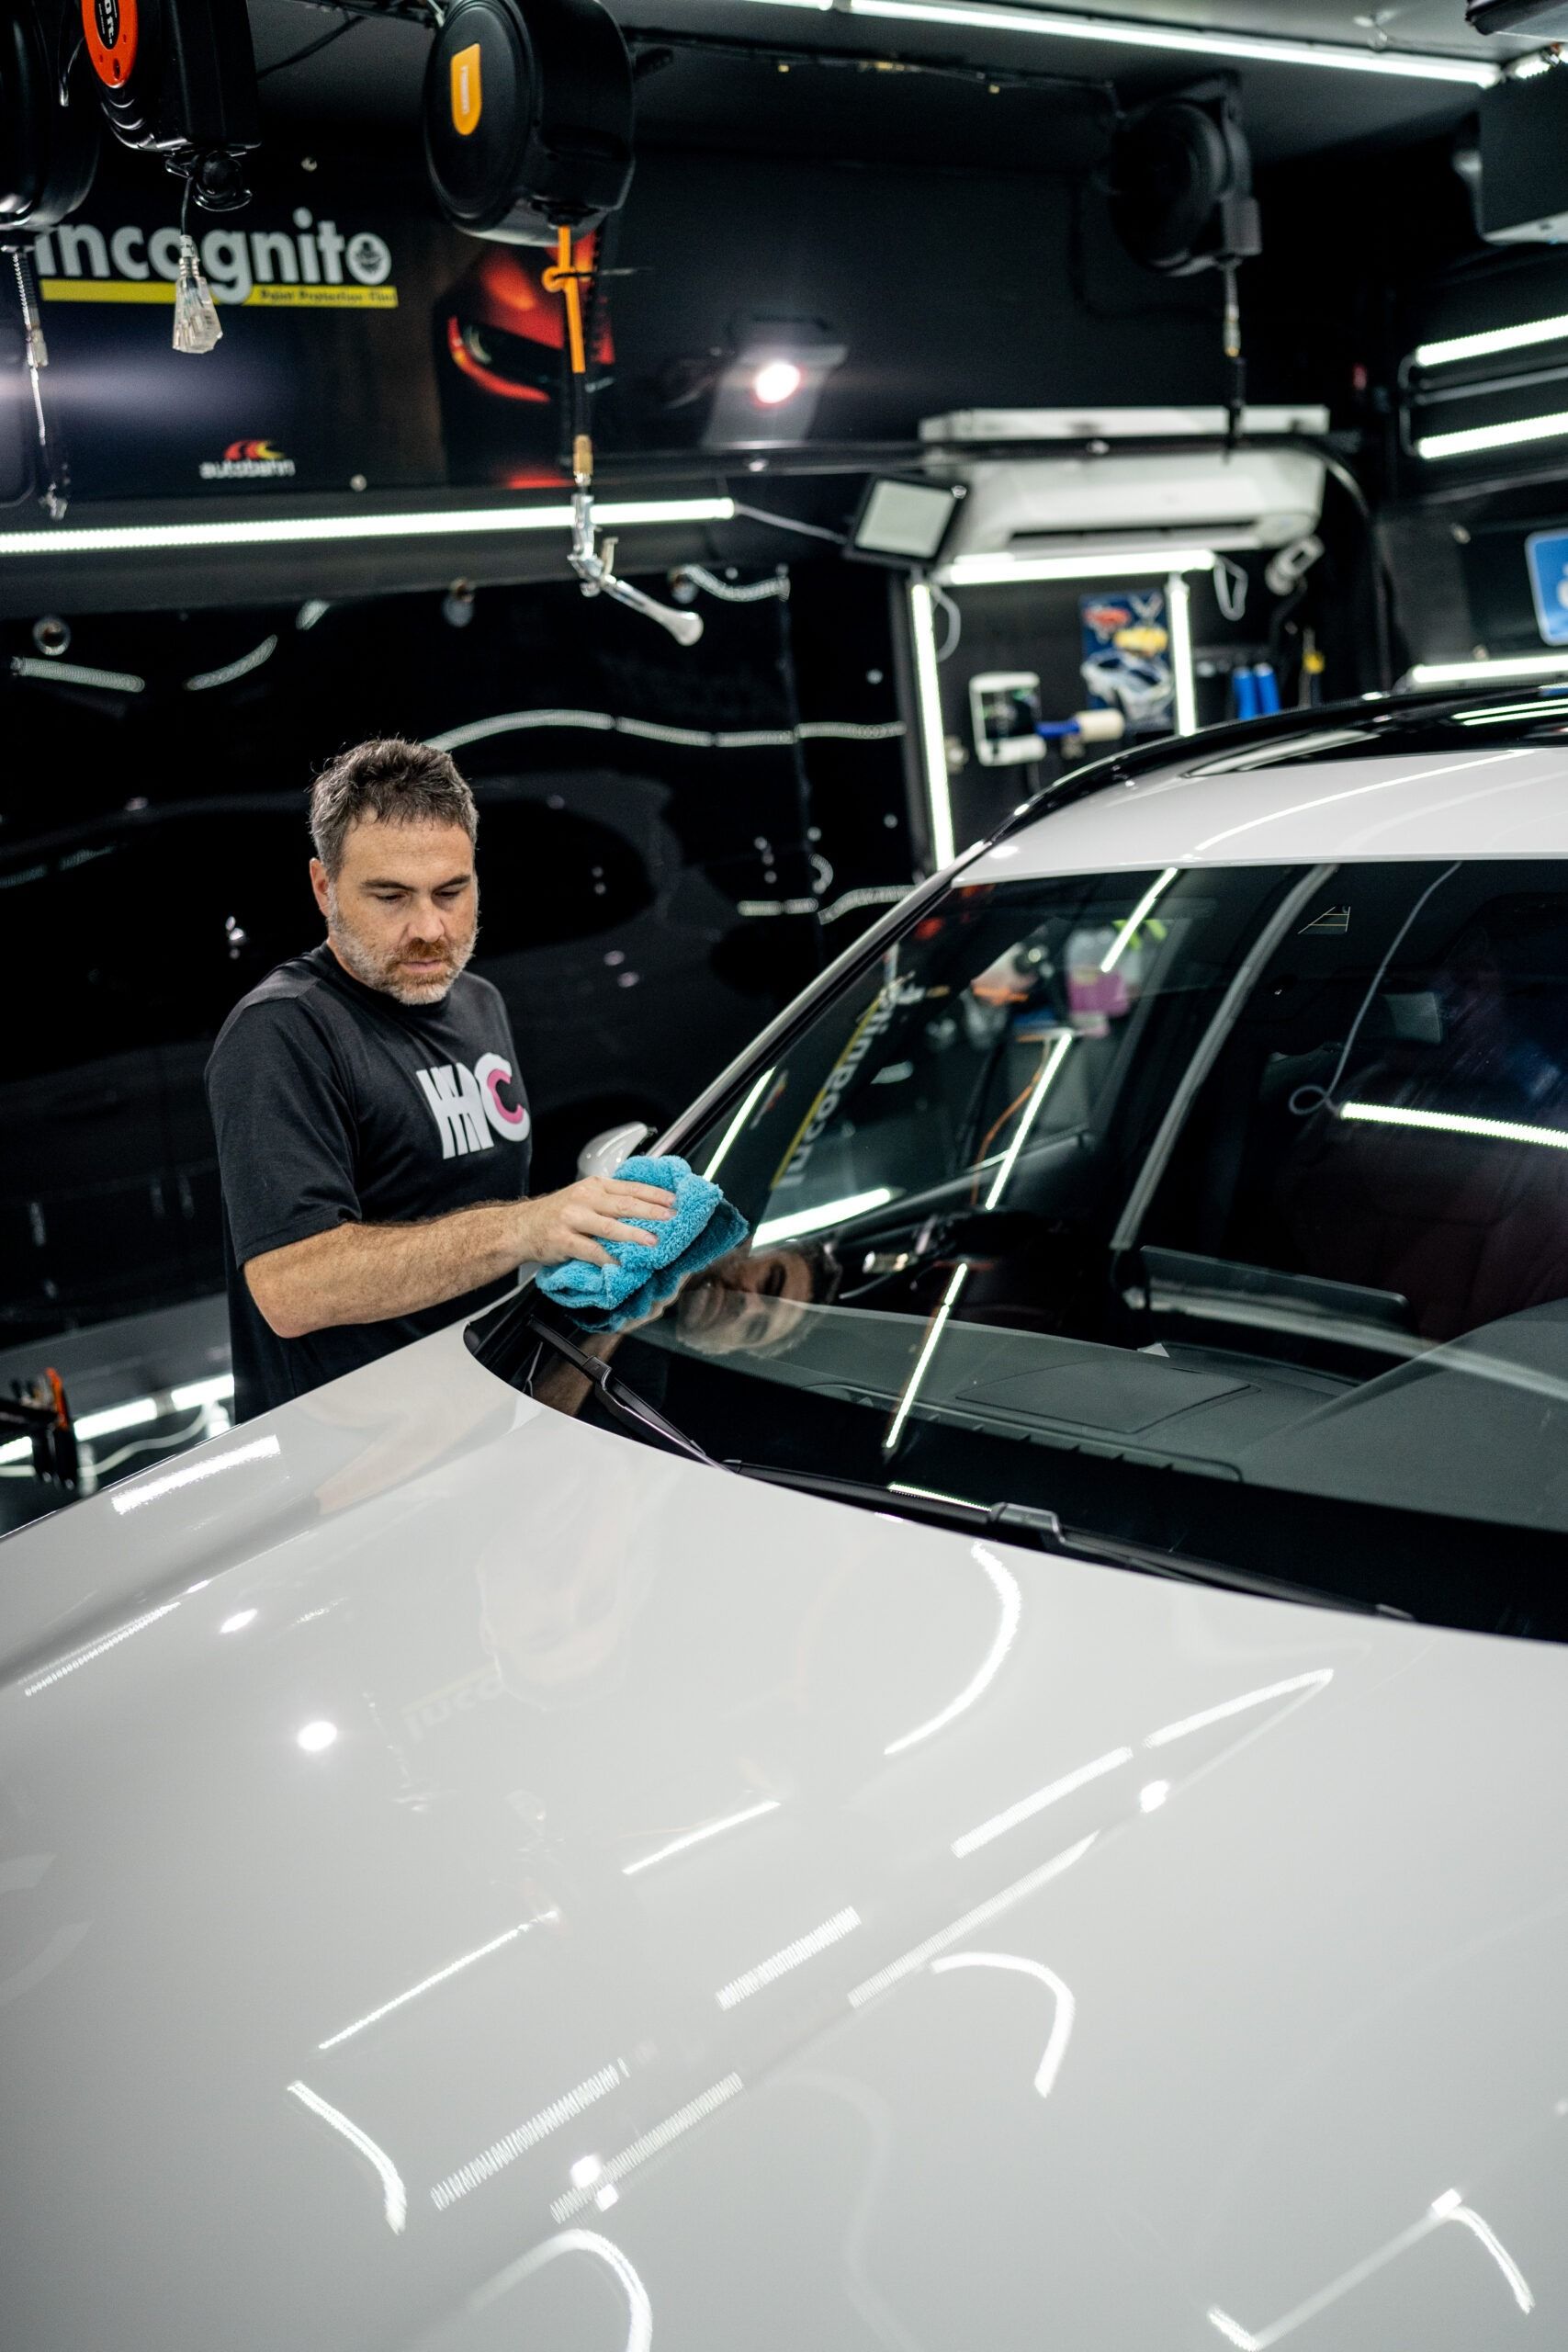 A man is cleaning the windshield of a white car in a garage.